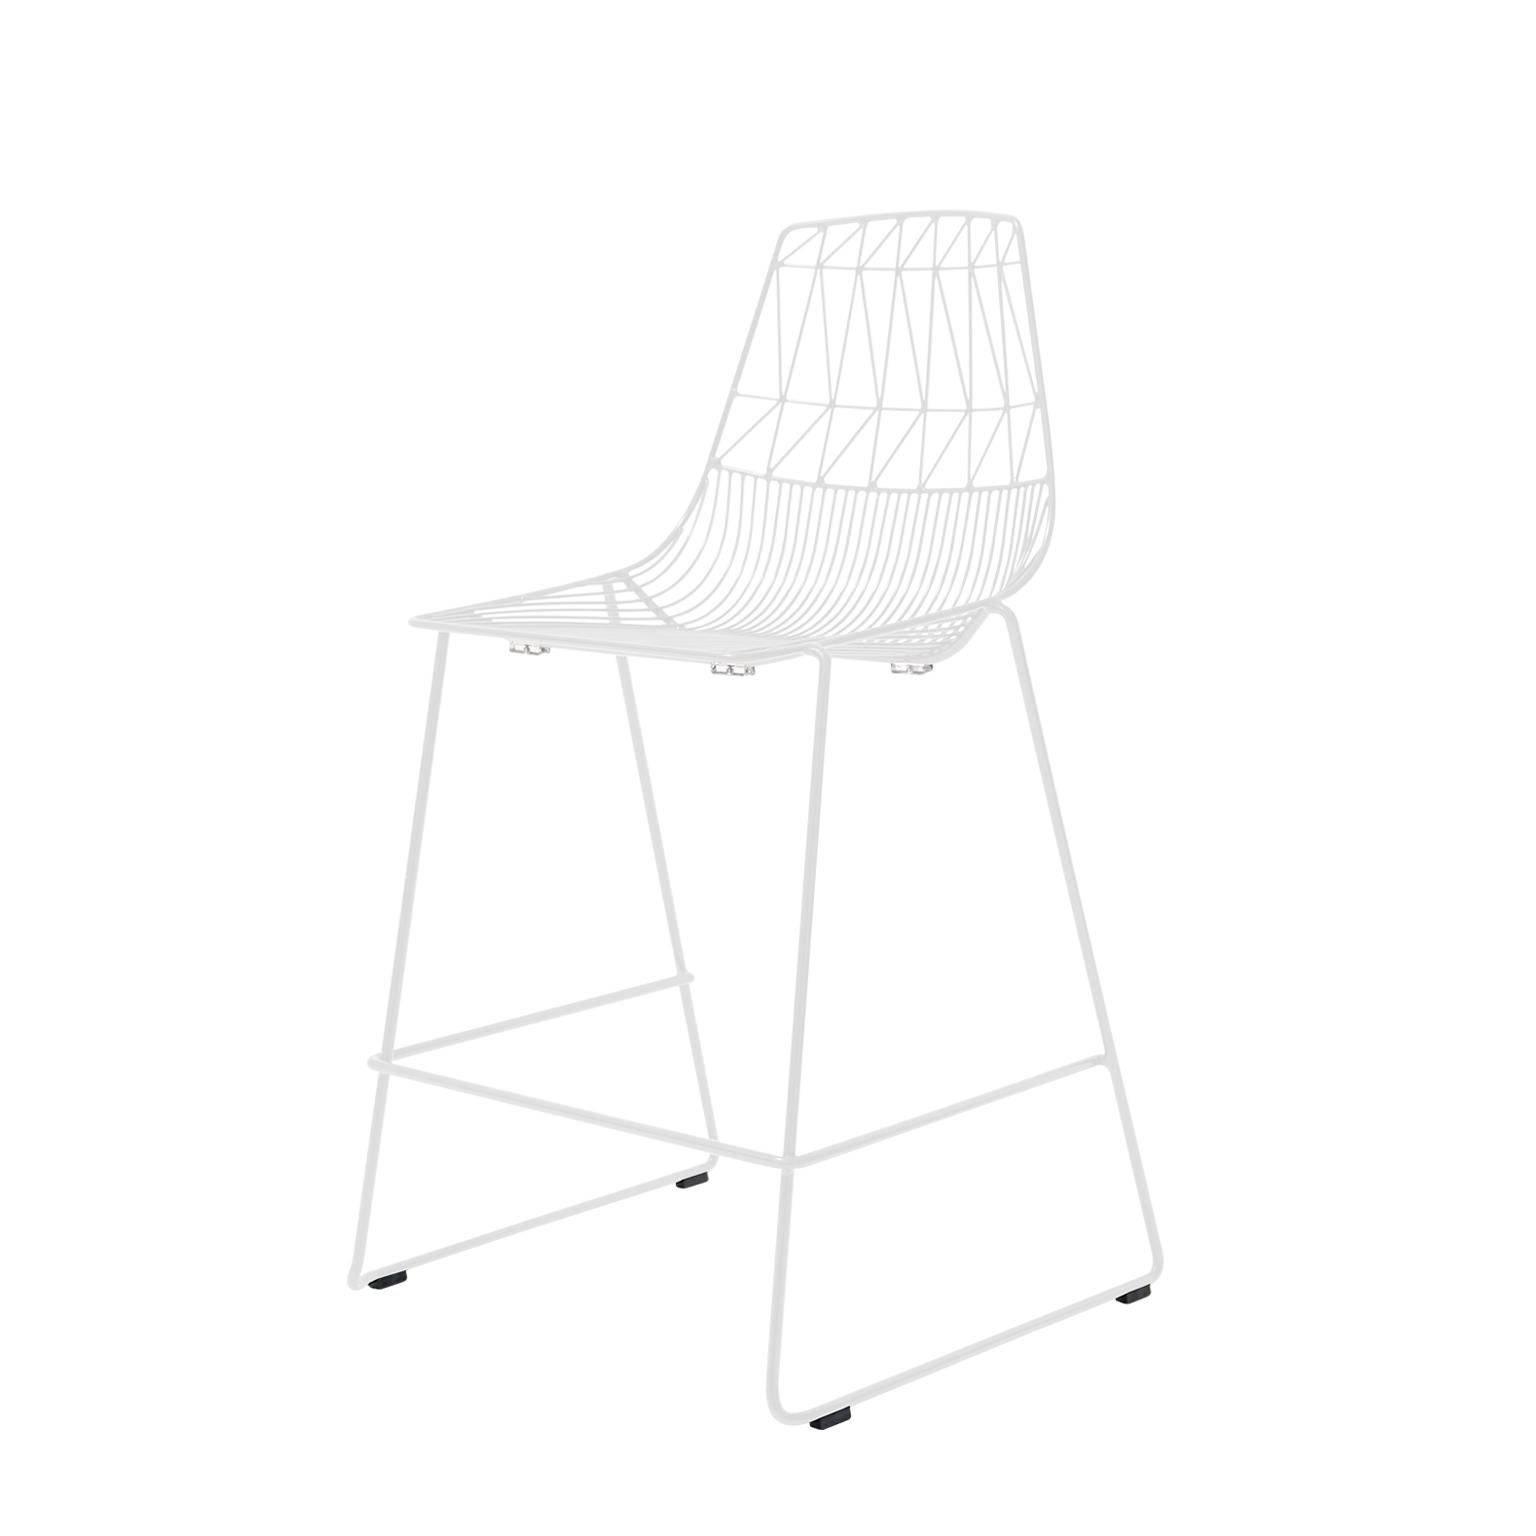 Bend Goods wire furniture
Another twist on the Lucy chair by Bend Goods, the Stacking Lucy Counter stool is a wire stool with a unique shape that makes it easy to move and rearrange. This modern wire counter stool is at home in commercial spaces or